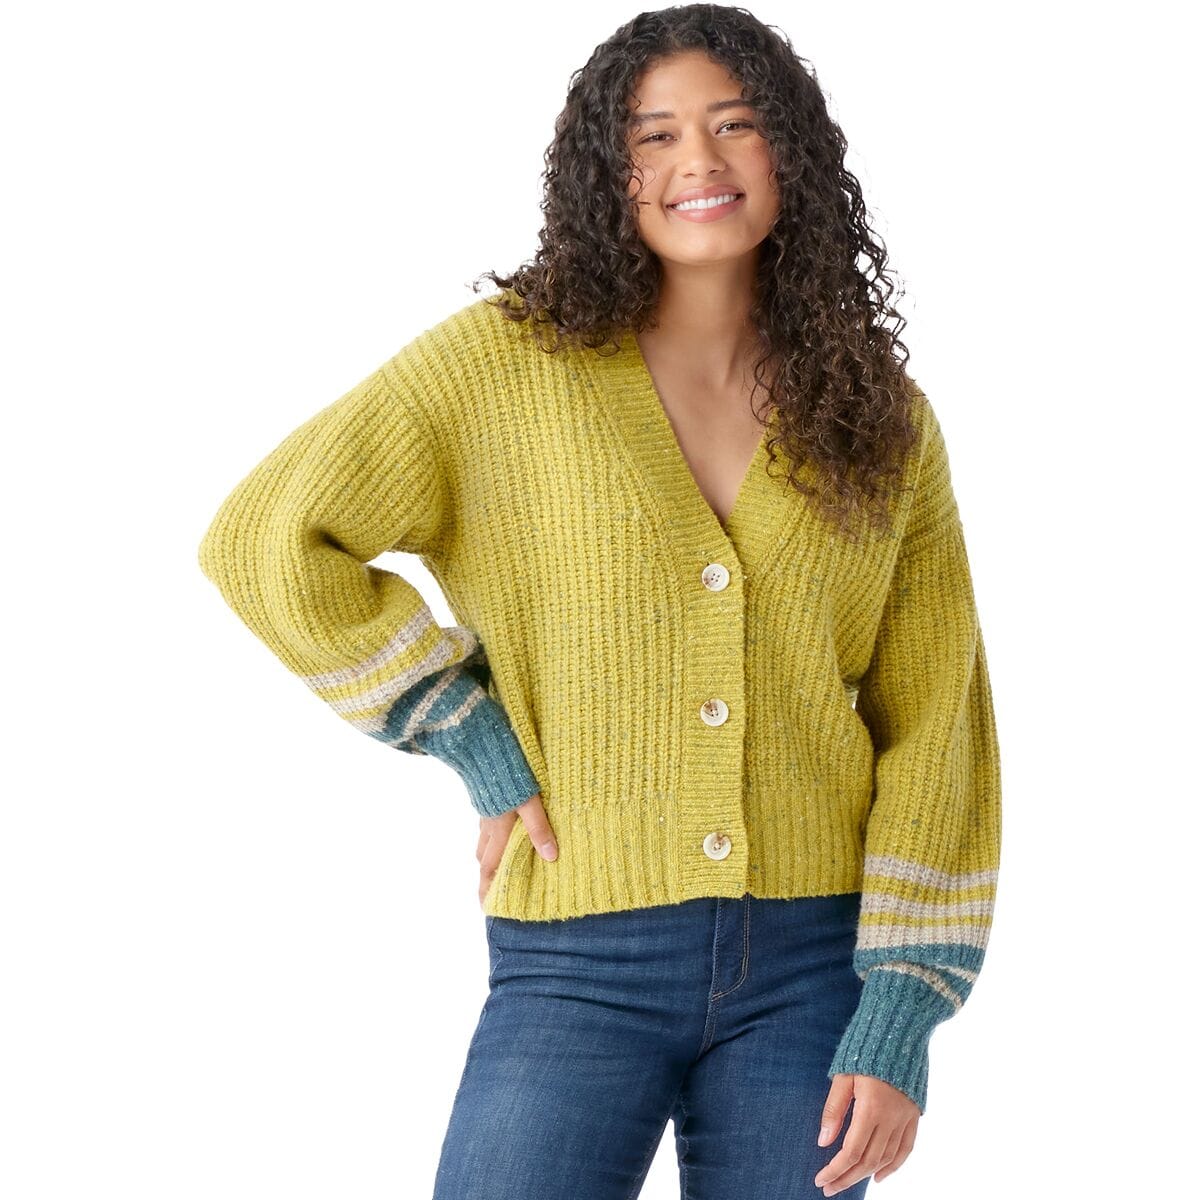 Smartwool Cozy Lodge Cropped Cardigan Sweater - Women's - Clothing